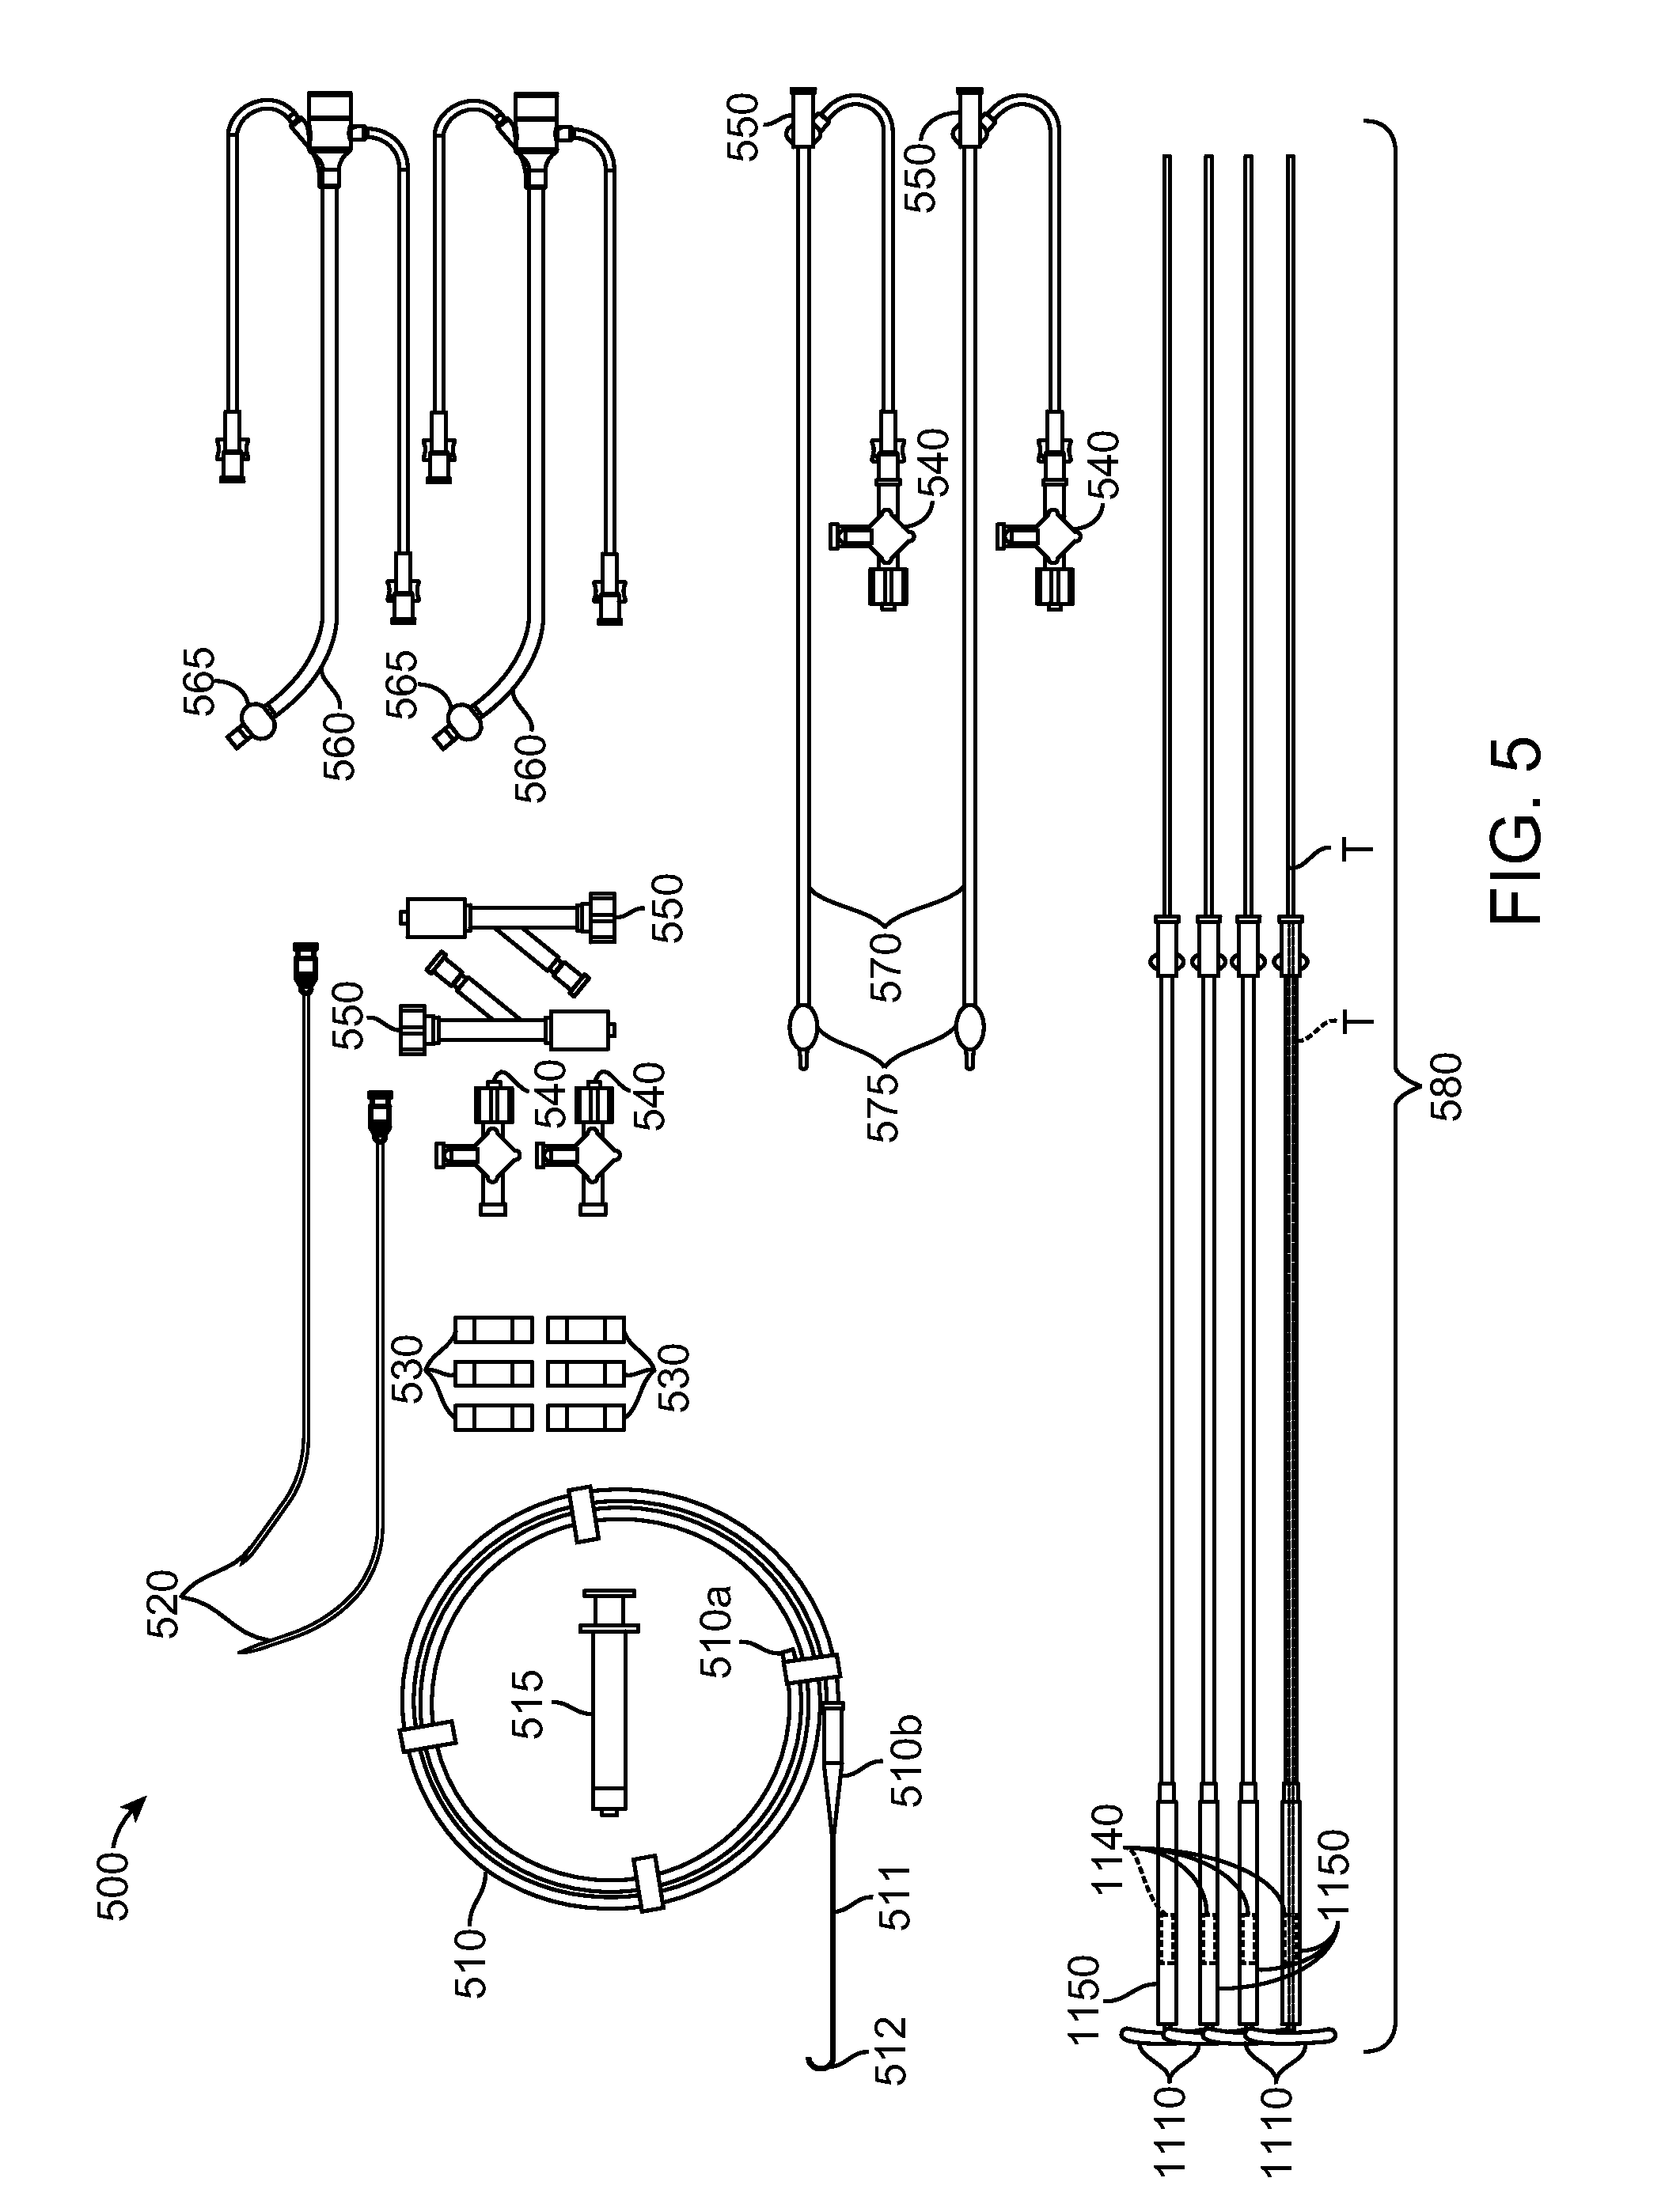 Cardiac anchor structures, methods, and systems for treatment of congestive heart failure and other conditions